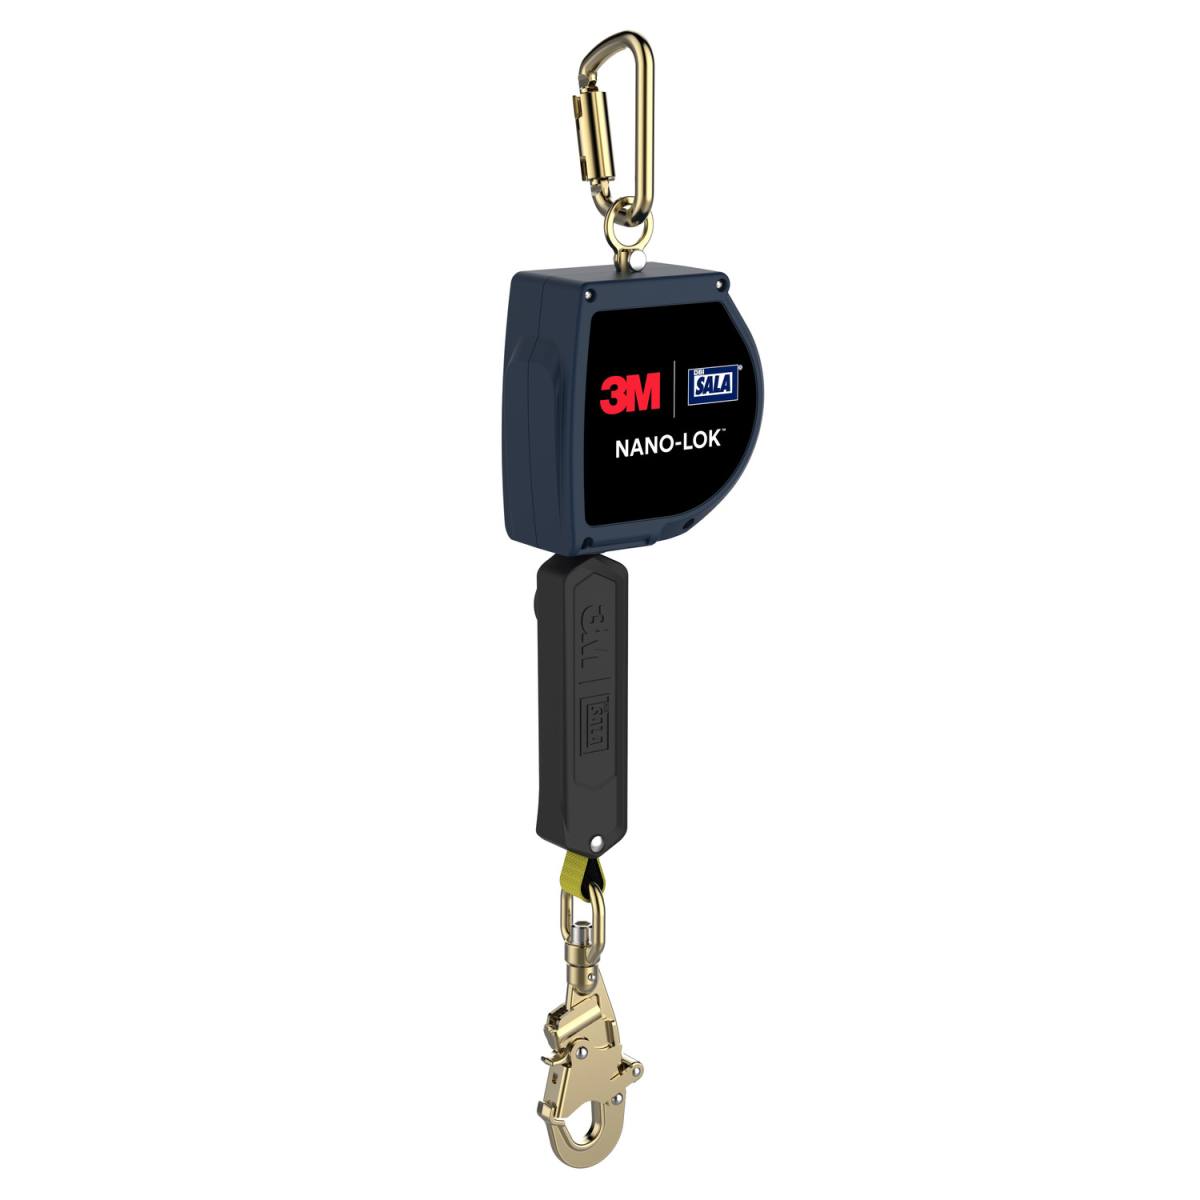  3M DBI-SALA Nano-Lok, webbing length: 6.0 m, 1 x steel twistlock carabiner opening width 18 mm on the housing, 1 x steel one-hand carabiner opening width 19 mm on the webbing, 140 kg user weight, 3M Connected Safety-ready RFID tag for inspection, 6.0 m